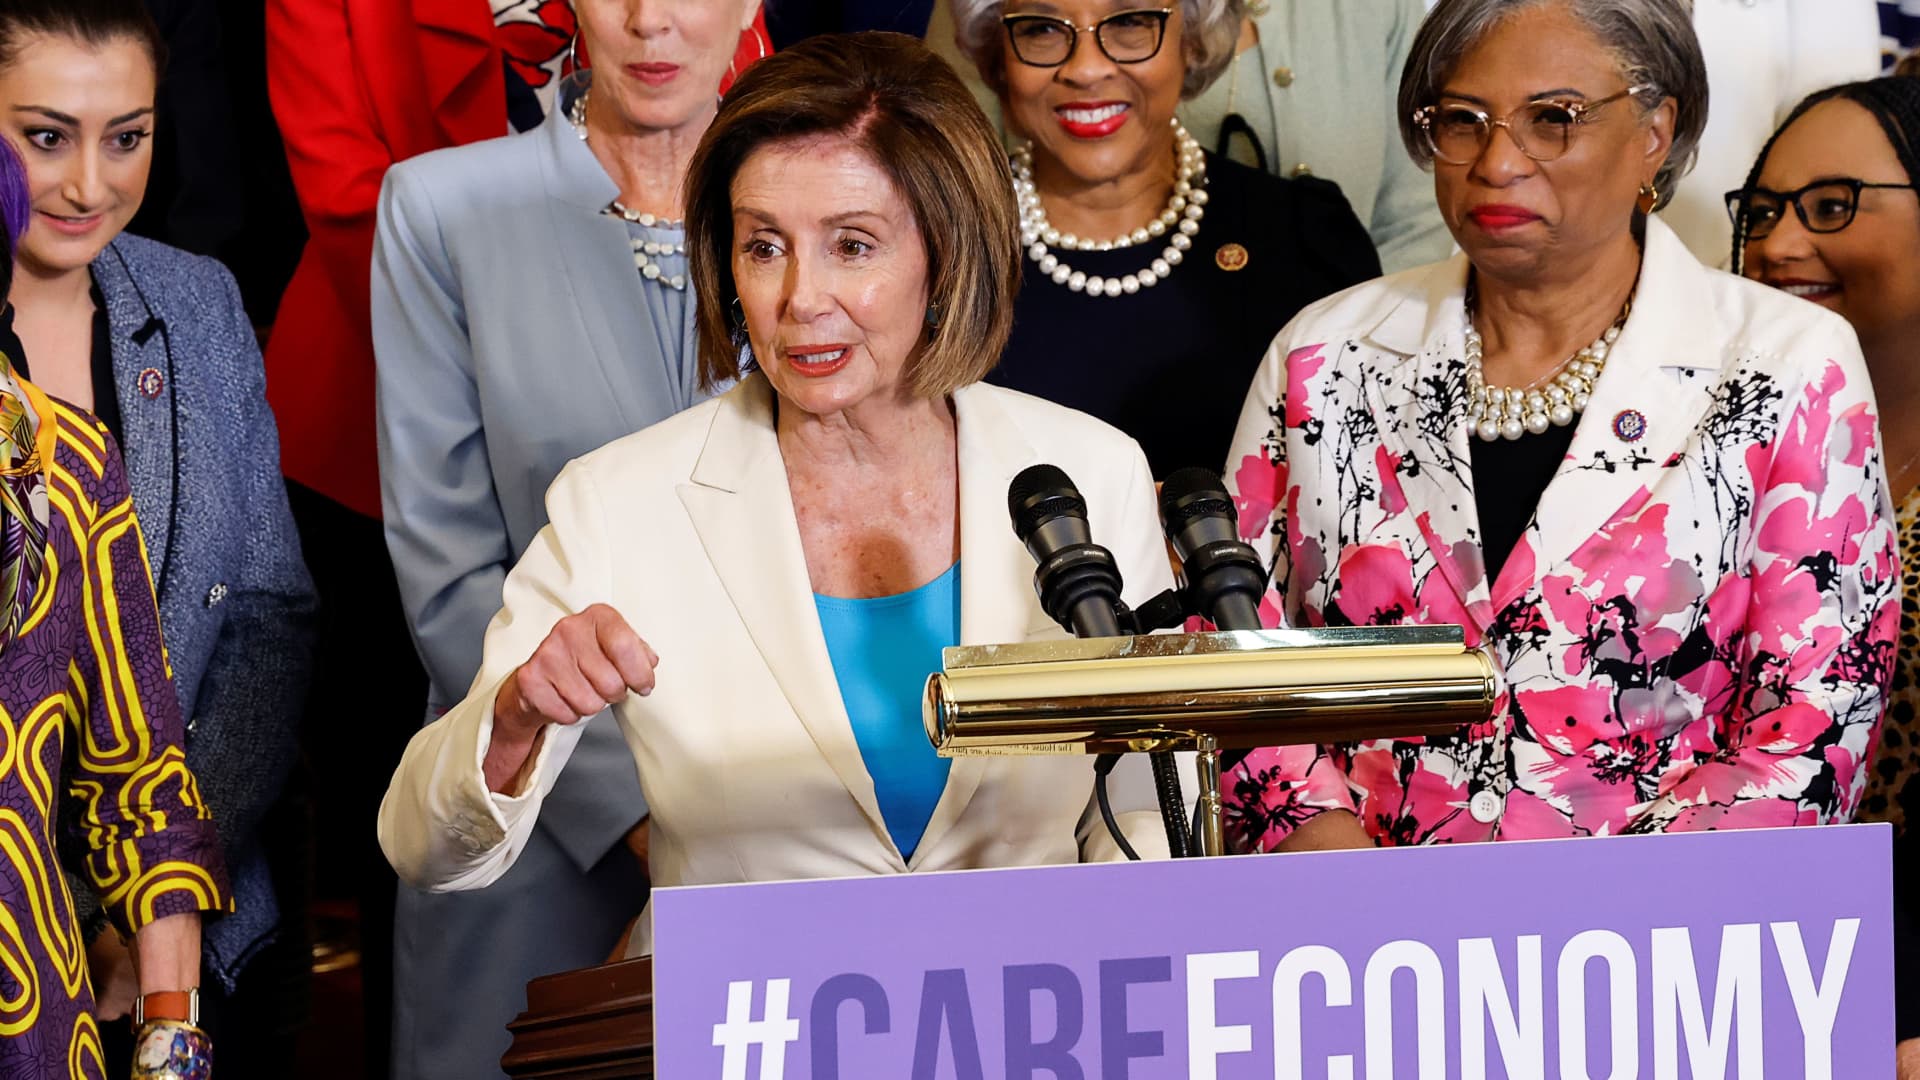 U.S. House Speaker Nancy Pelosi (D-CA) stands with members of the Democratic Women's Caucus (DWC) during a press event on the care economy at the U.S. Capitol in Washington, July 1, 2021.